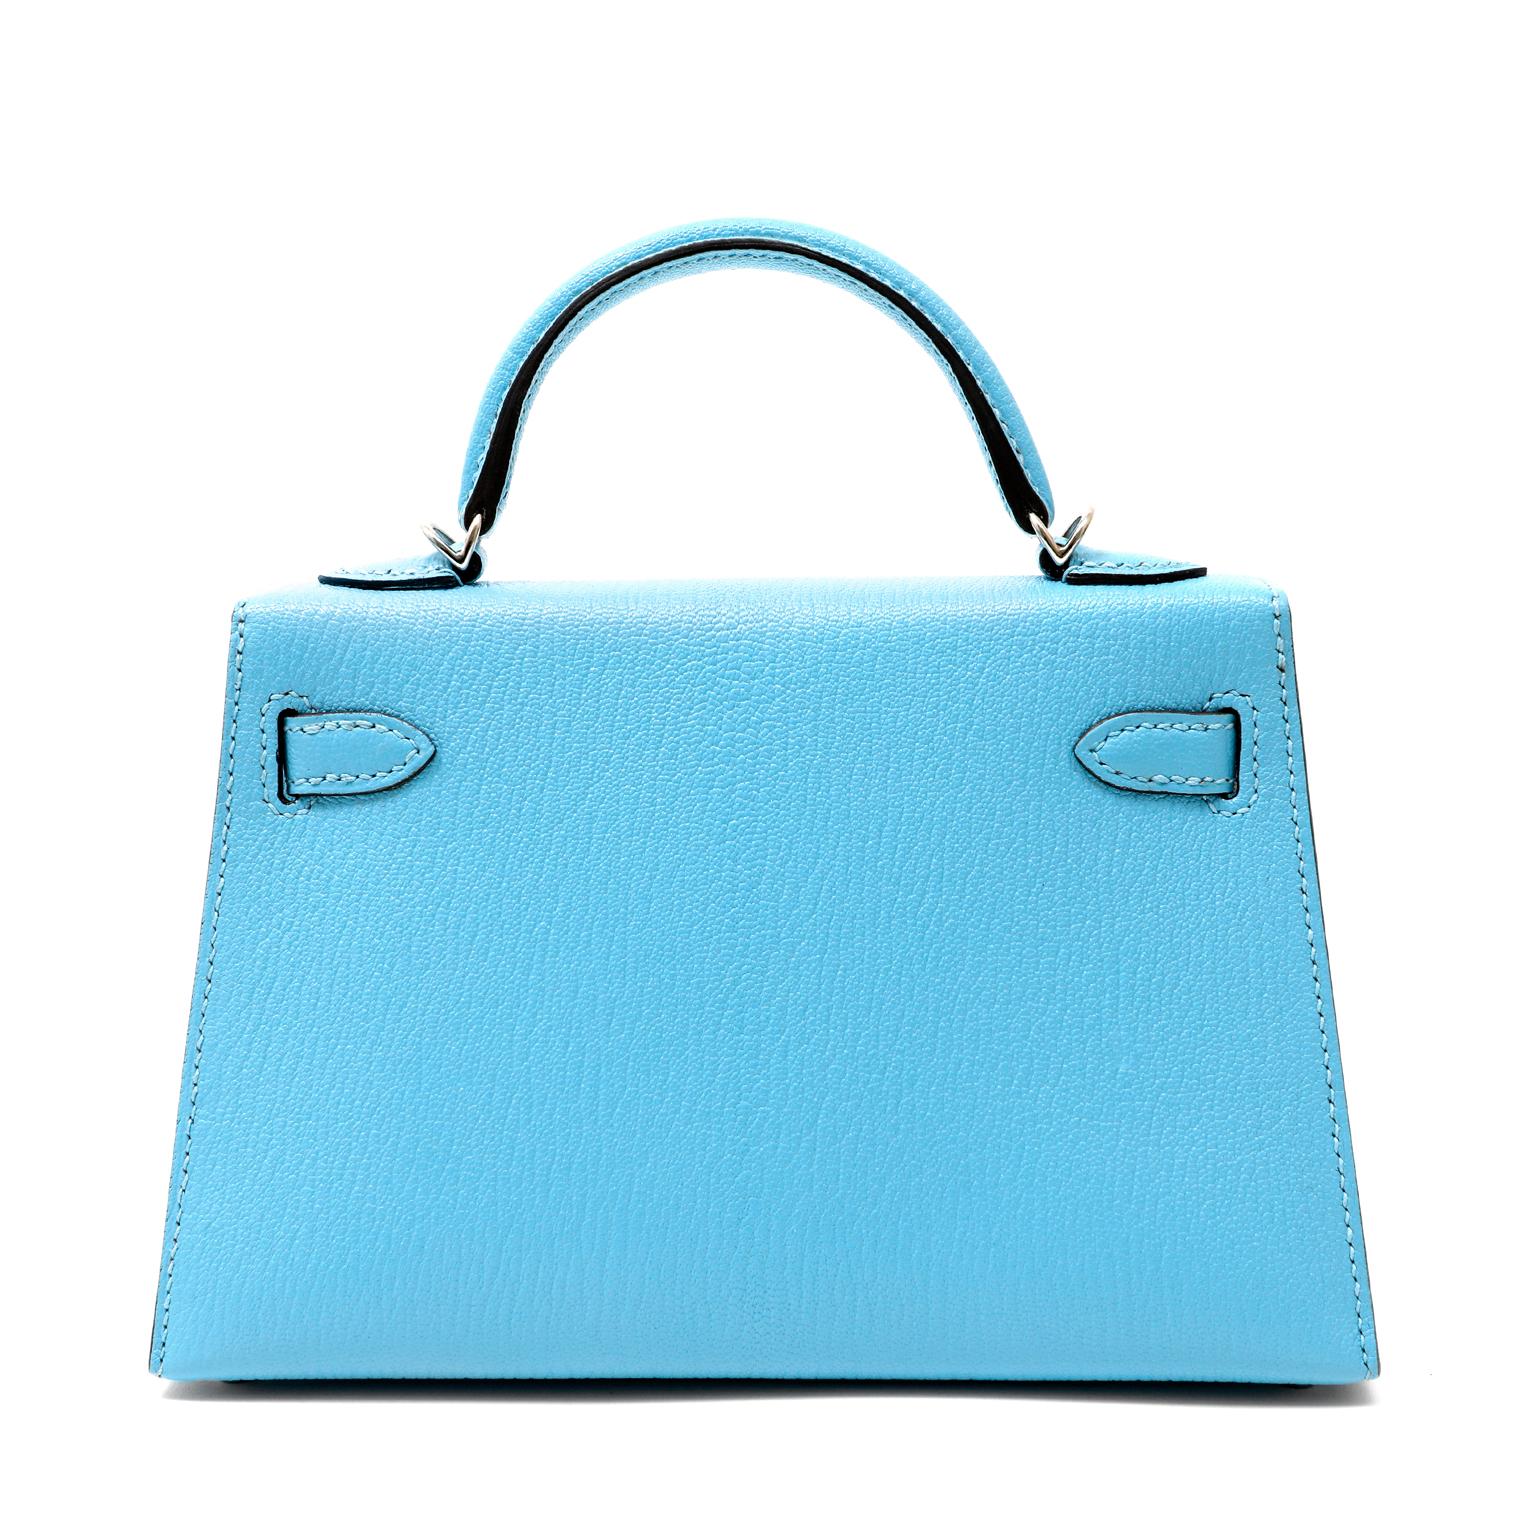 This authentic Hermès Robin's Egg Blue Chevre Mini Kelly is in pristine condition with the protective plastic intact on the hardware.  Petite and feminine, the crossbody Kelly is very rare in the 20 cm silhouette.
Striking Tiffany blue chevre